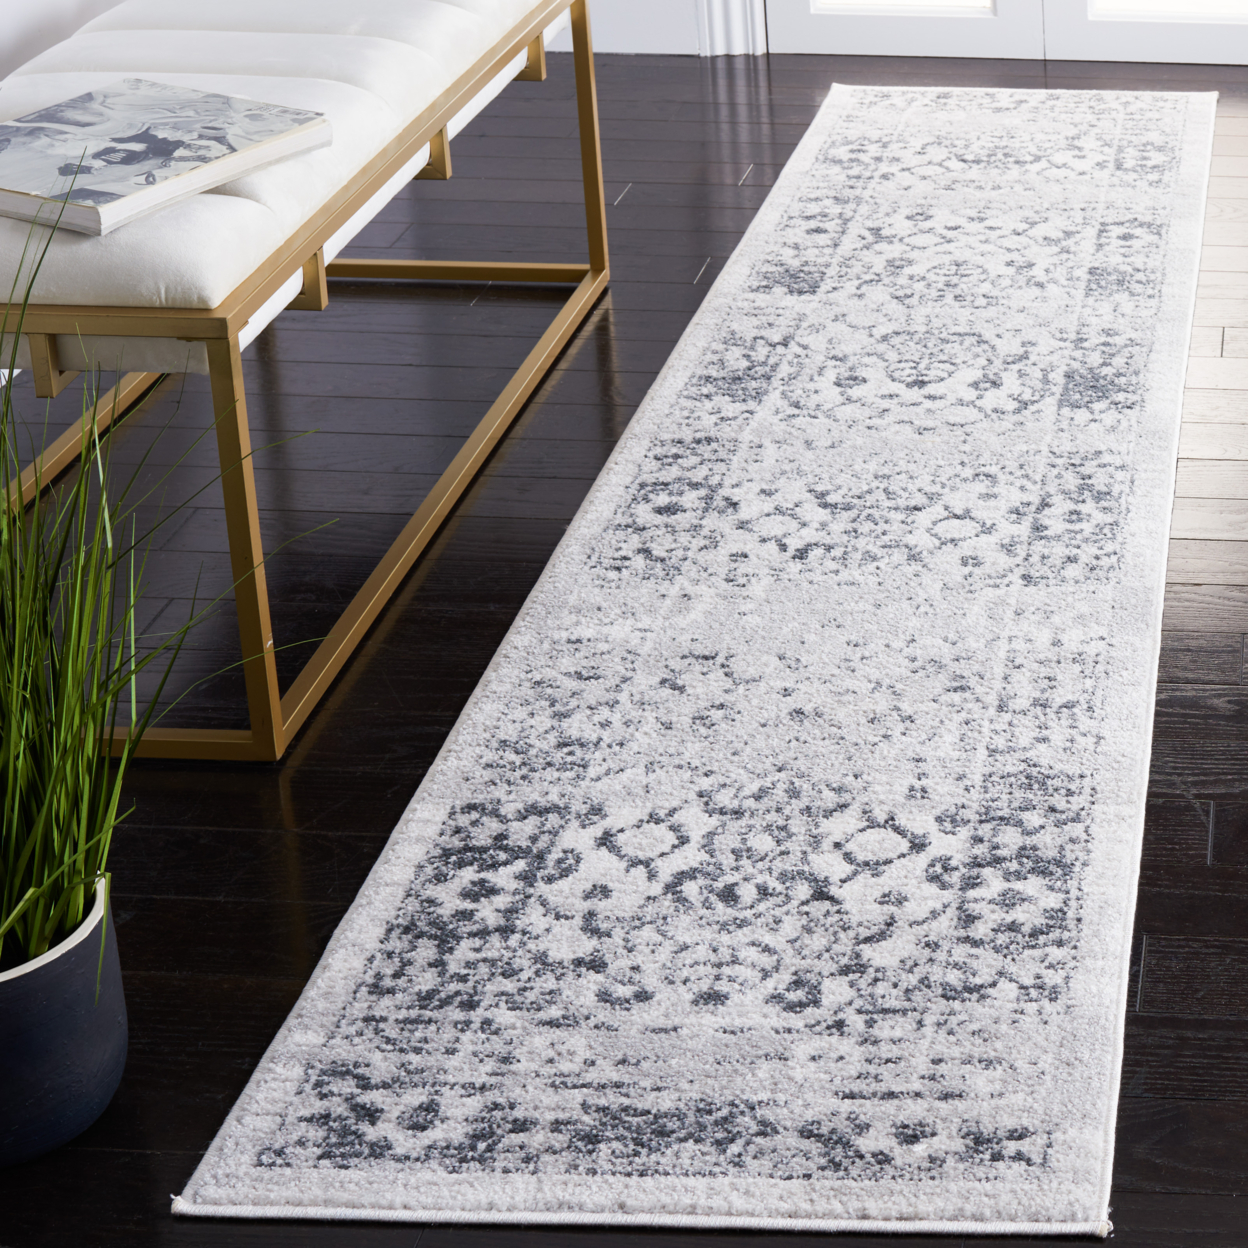 SAFAVIEH Toscana Collection TOS654A Ivory / Grey Rug - 6' 7 Square